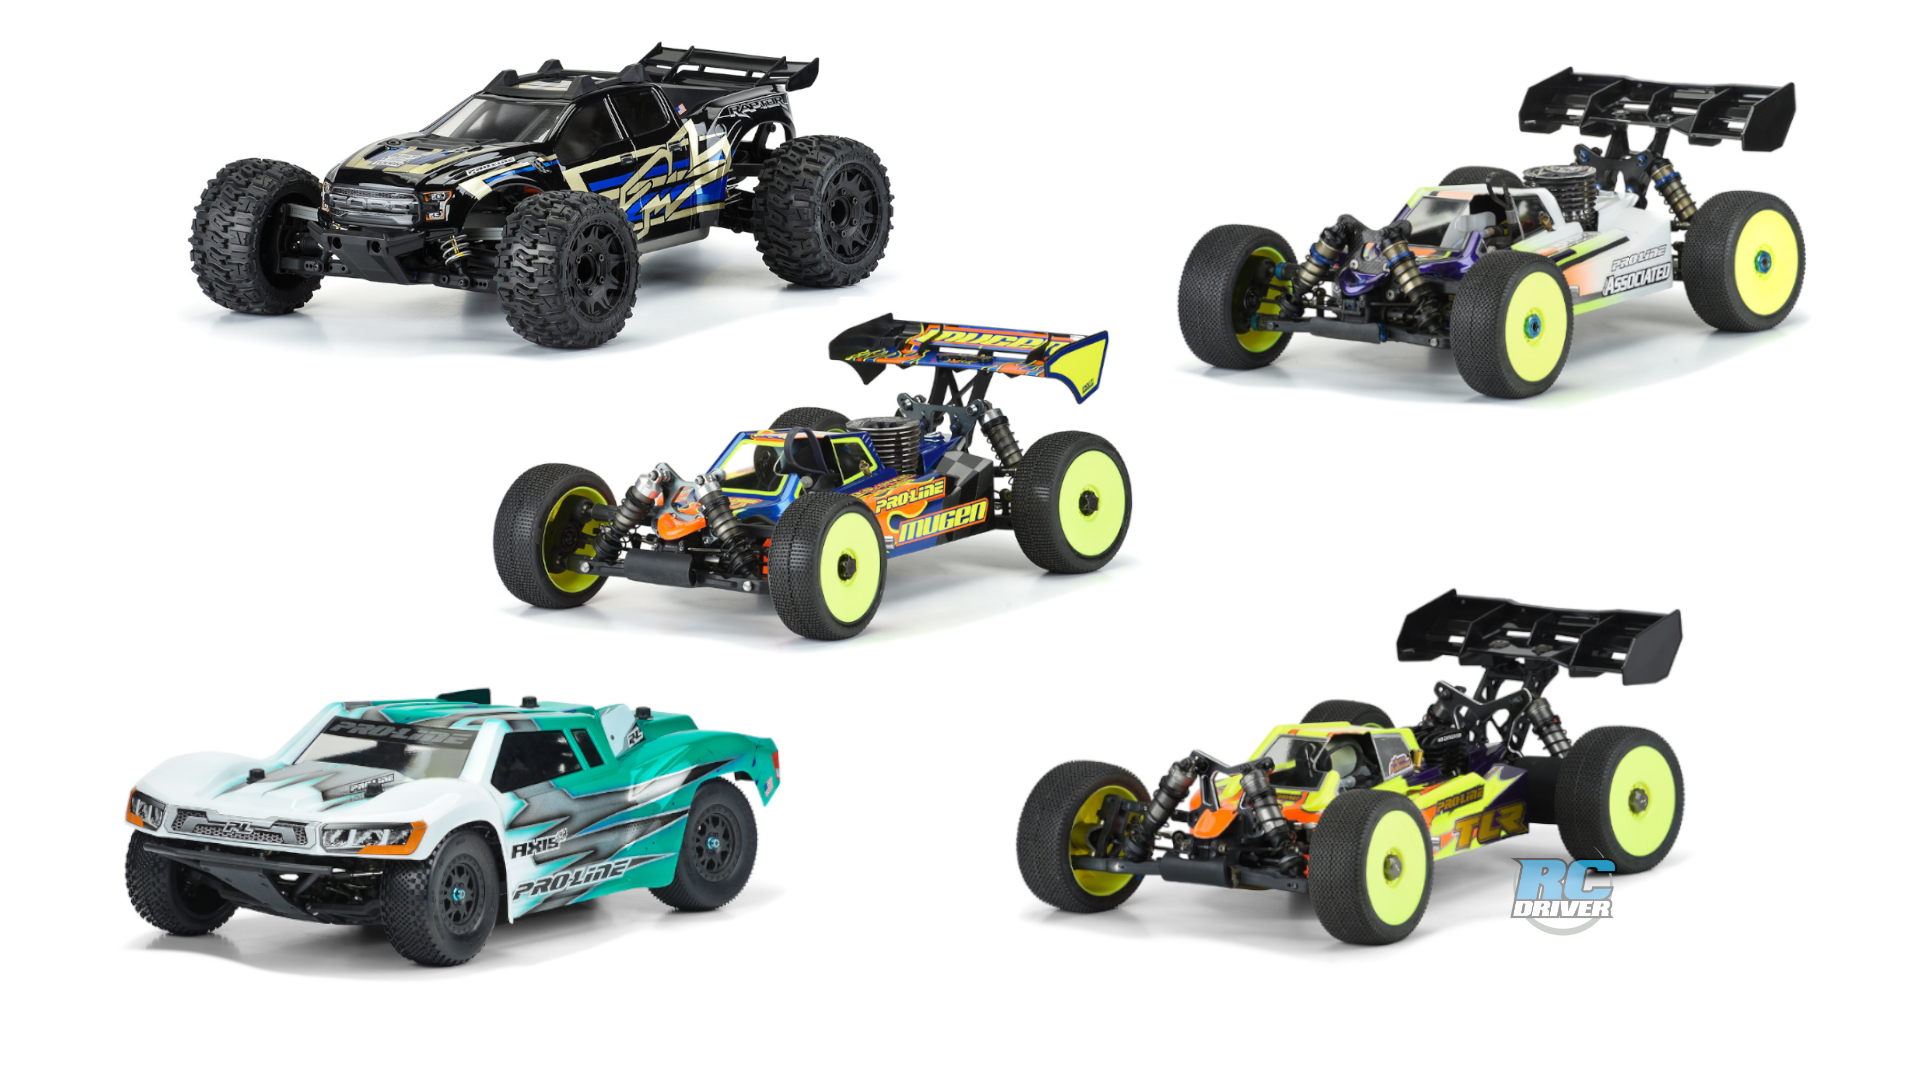 Pro-Line new off-road body releases 